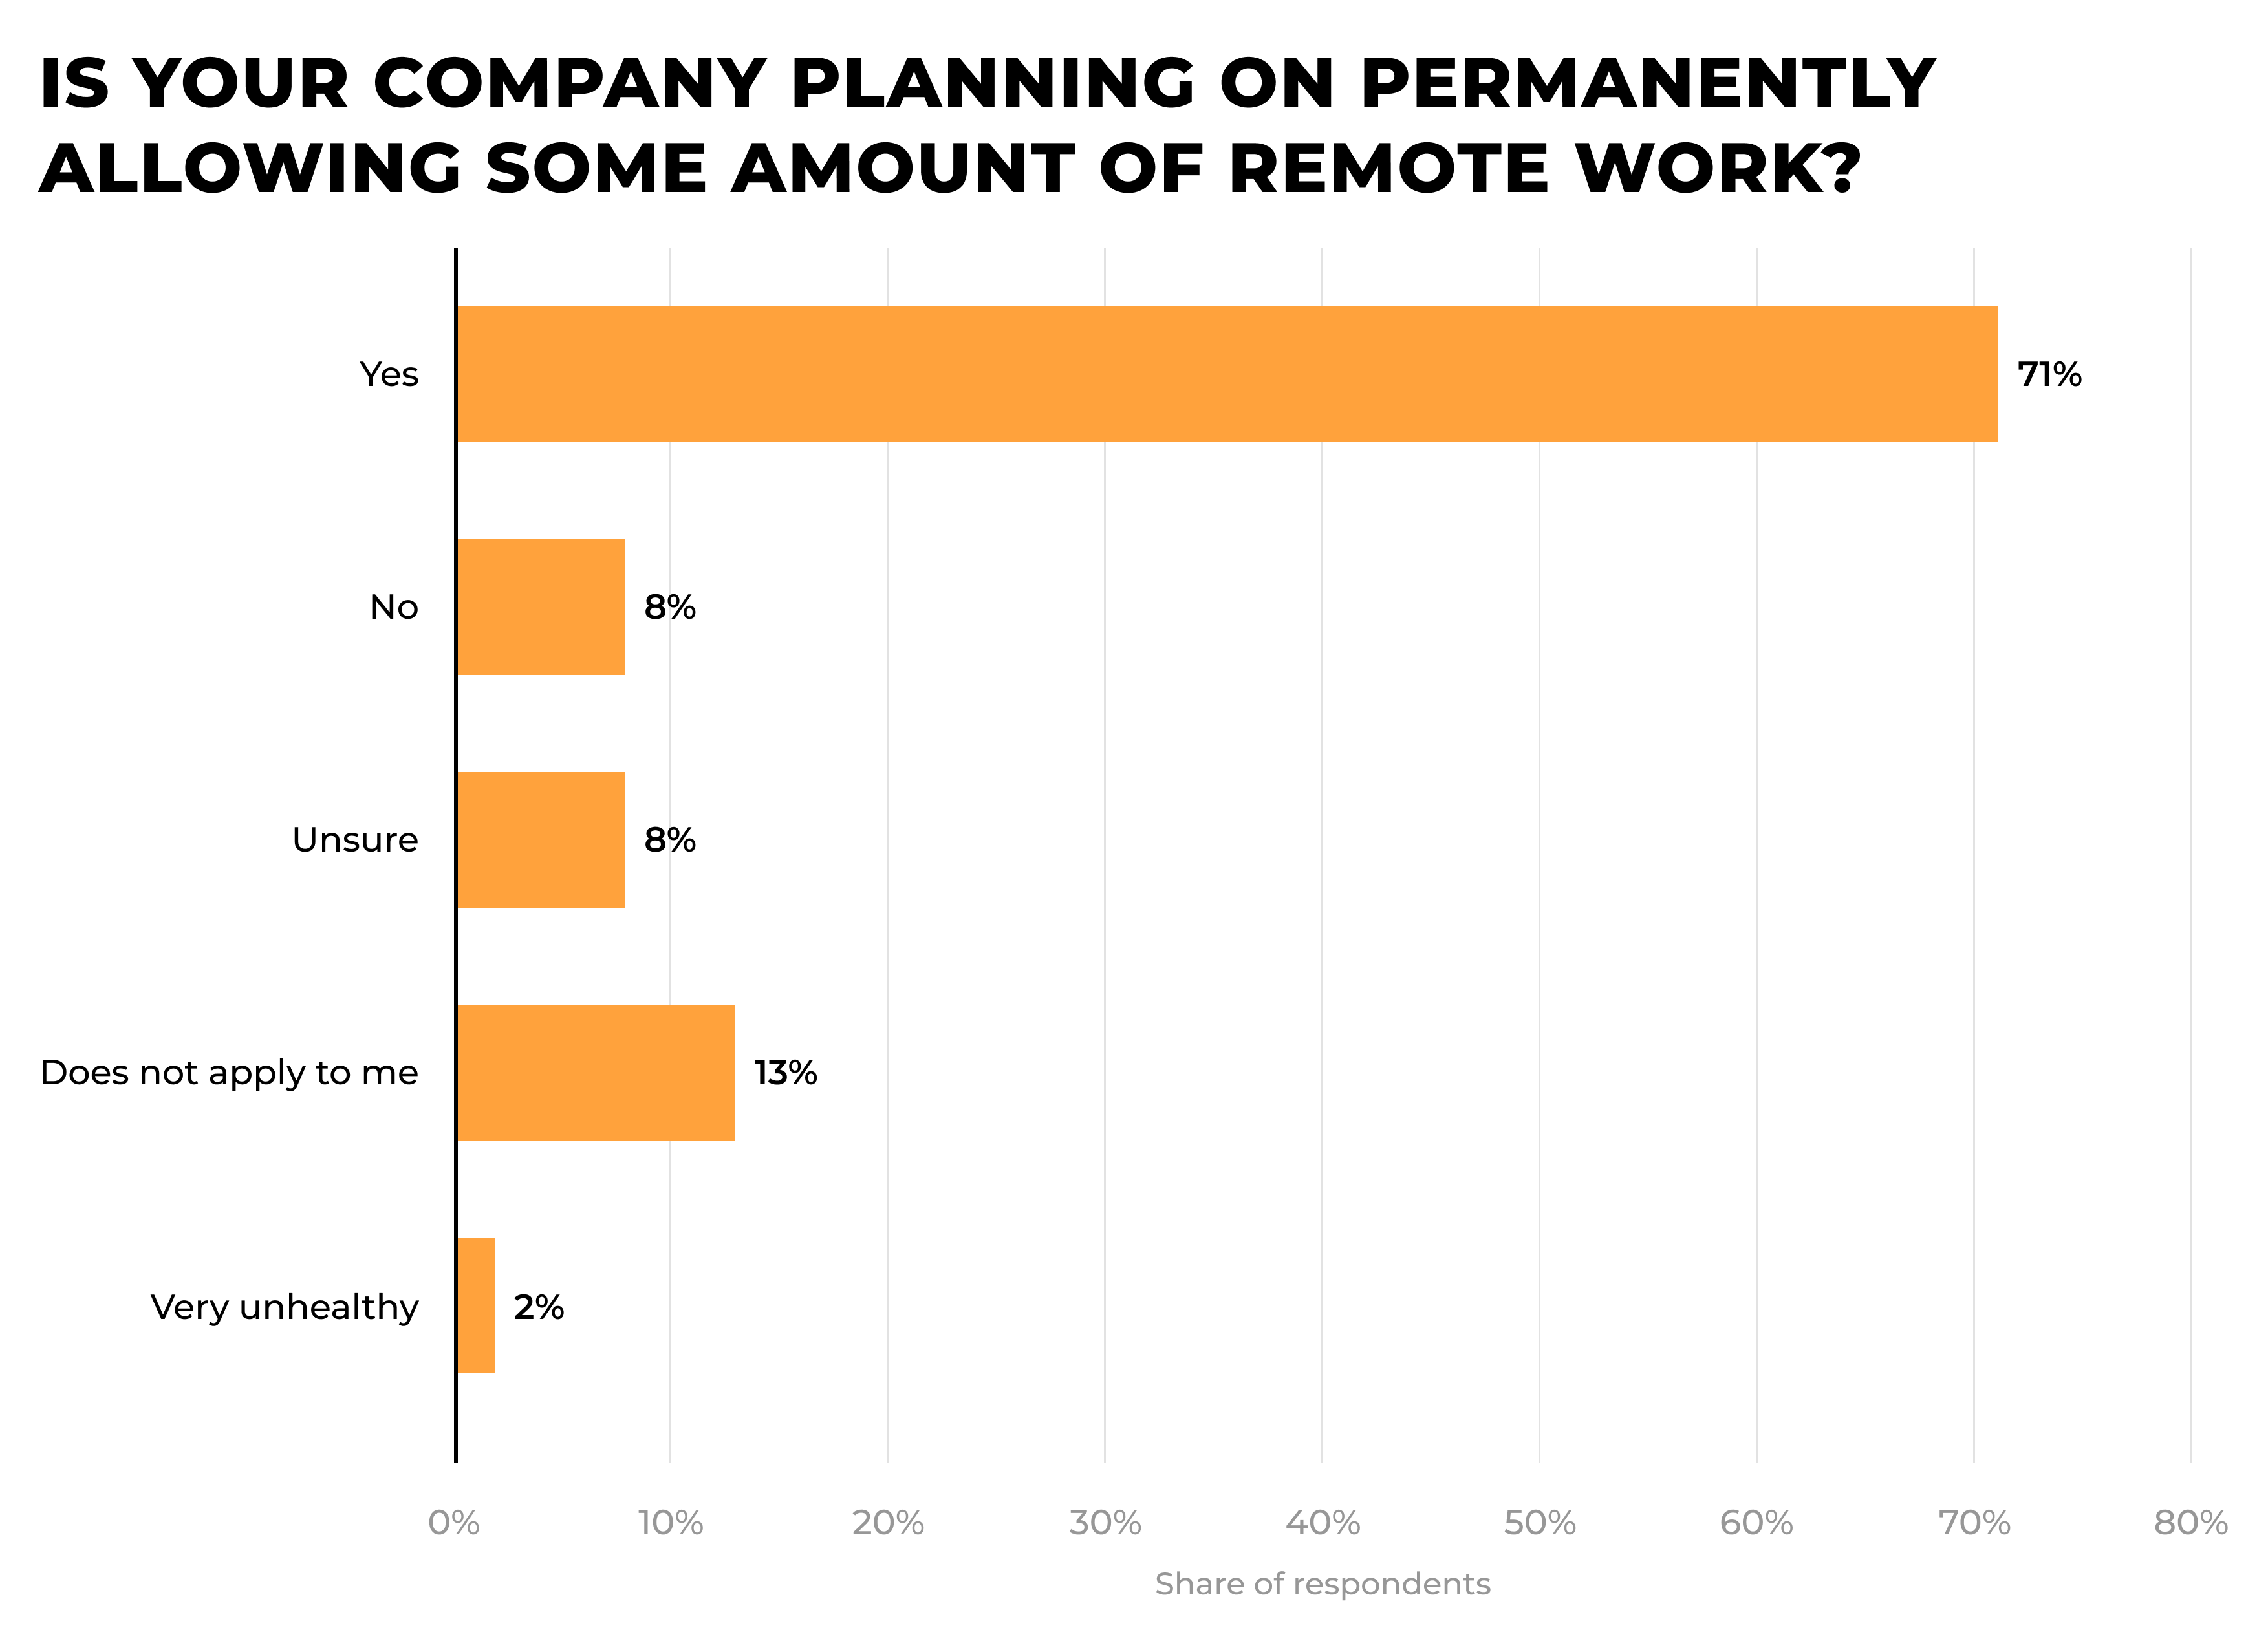 Is your company planning on permanently allowing some amount of remote work?